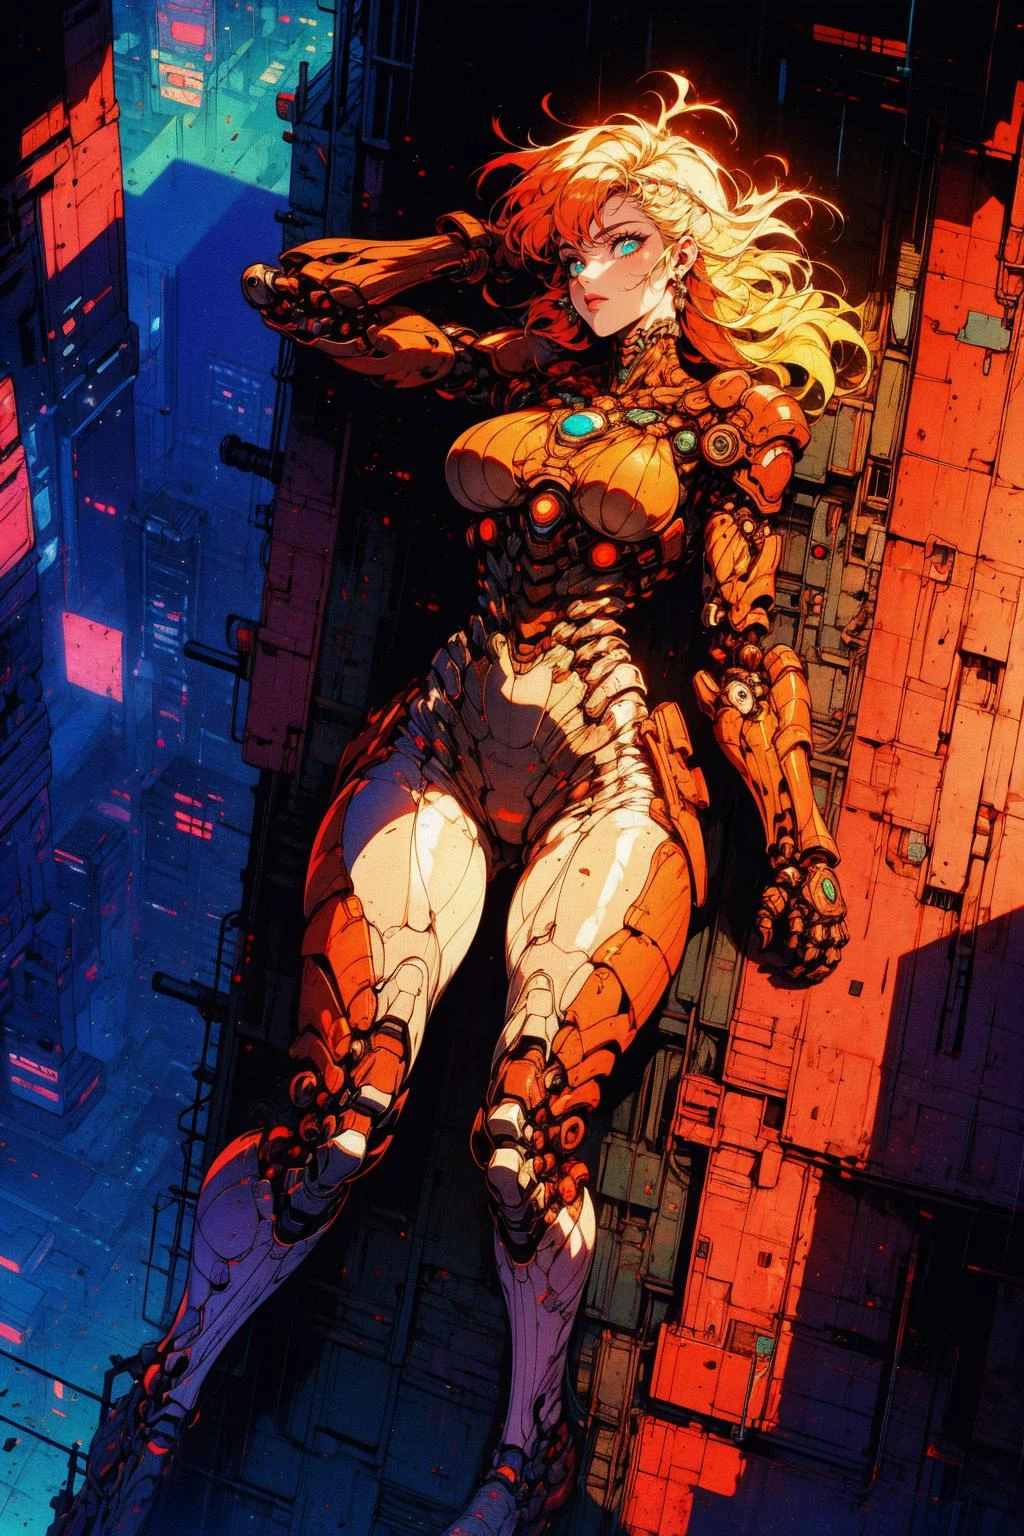 (masterpiece:1.4), (intricate:1.2), (detailed:1.2), (vibrant colors:1.2), BREAK,
(cyberpunk:1.0), (from above:1.2), BREAK,
(1girl:1.0), (biomechanical:1.1), (lying on the back:1.1), (hands behind head:1.0), (rooftop view:1.0), (cyberpunk city from above:1.3), (precipice:1.1)